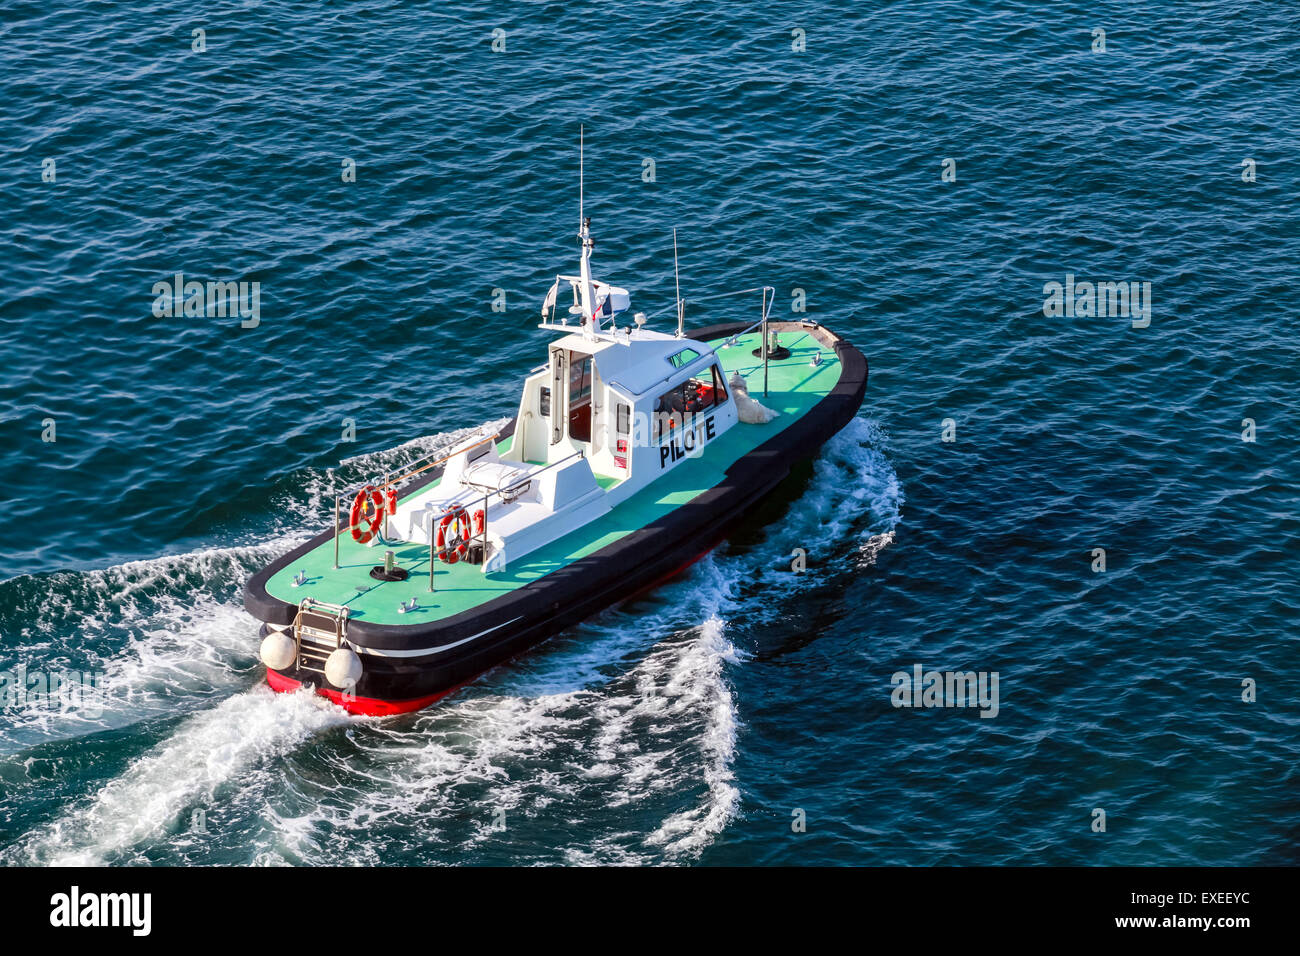 Small pilot boat with green deck and black hull is underway on a sea water Stock Photo